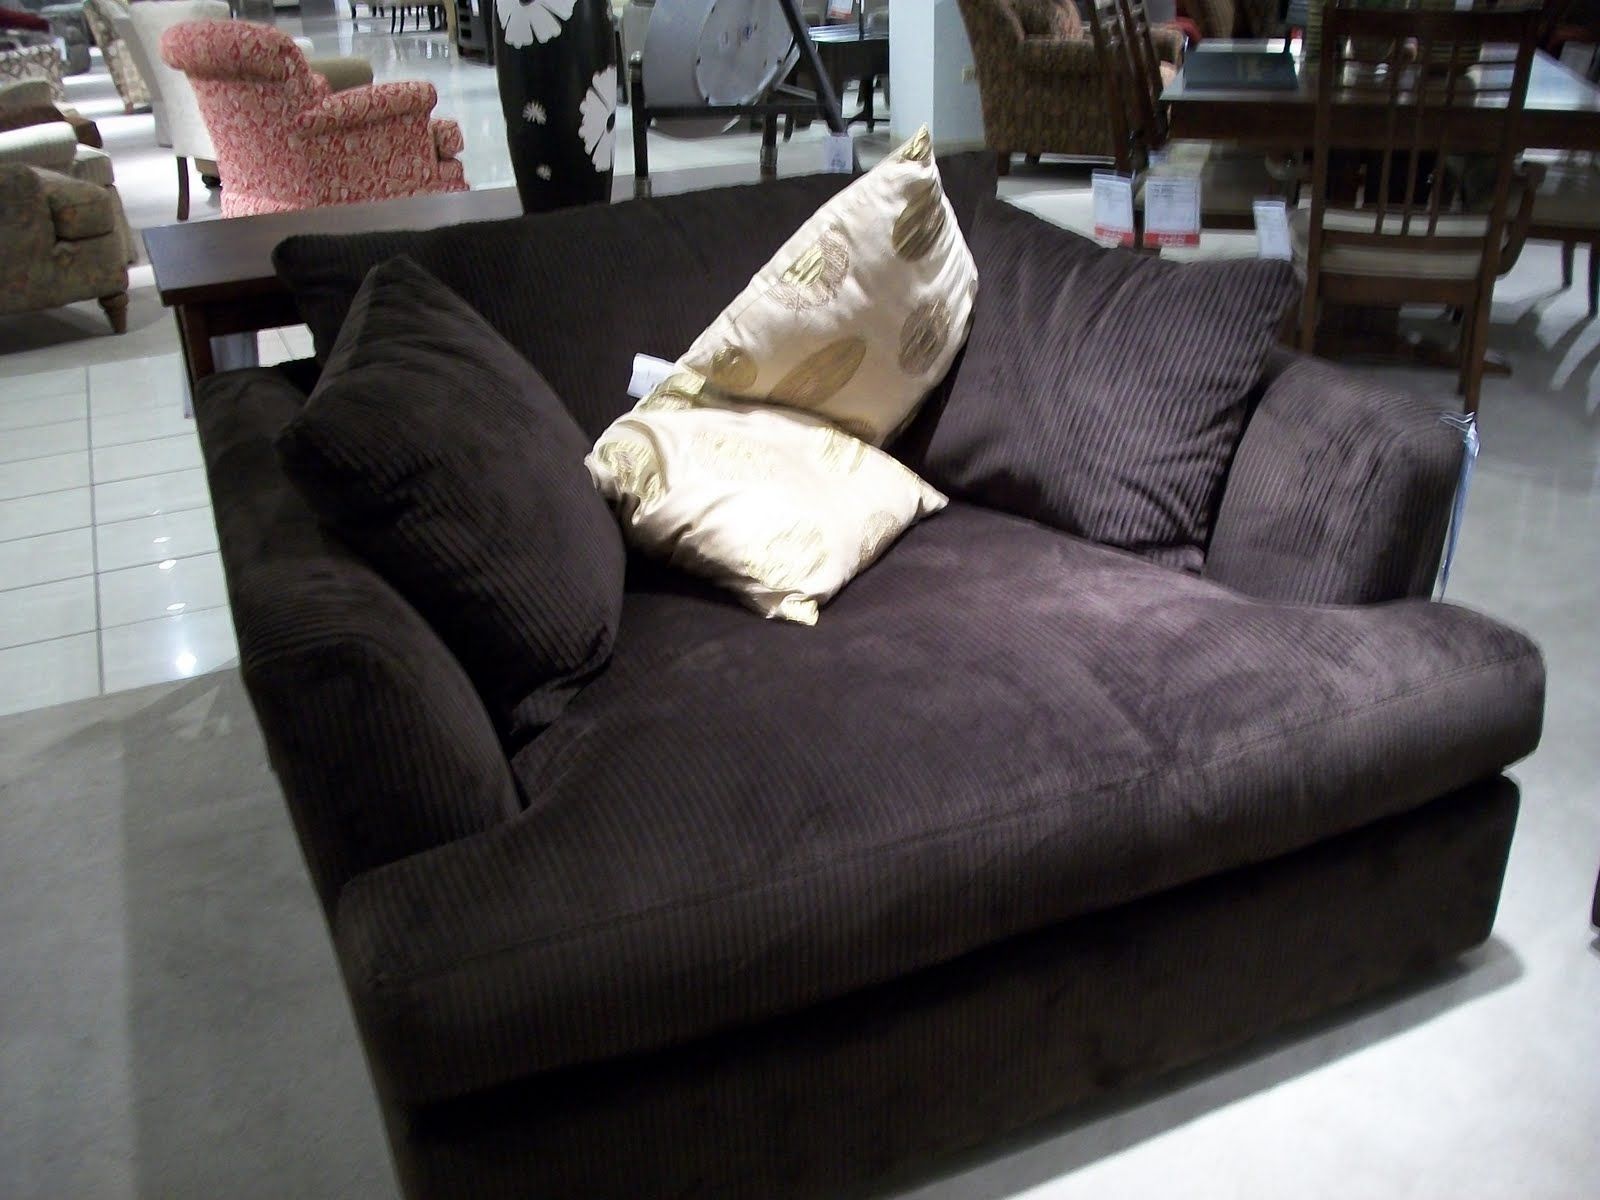 Big Comfy Oversized Armchair Where You Can Snuggle Up With A Good With Cohen Foam Oversized Sofa Chairs (View 5 of 25)